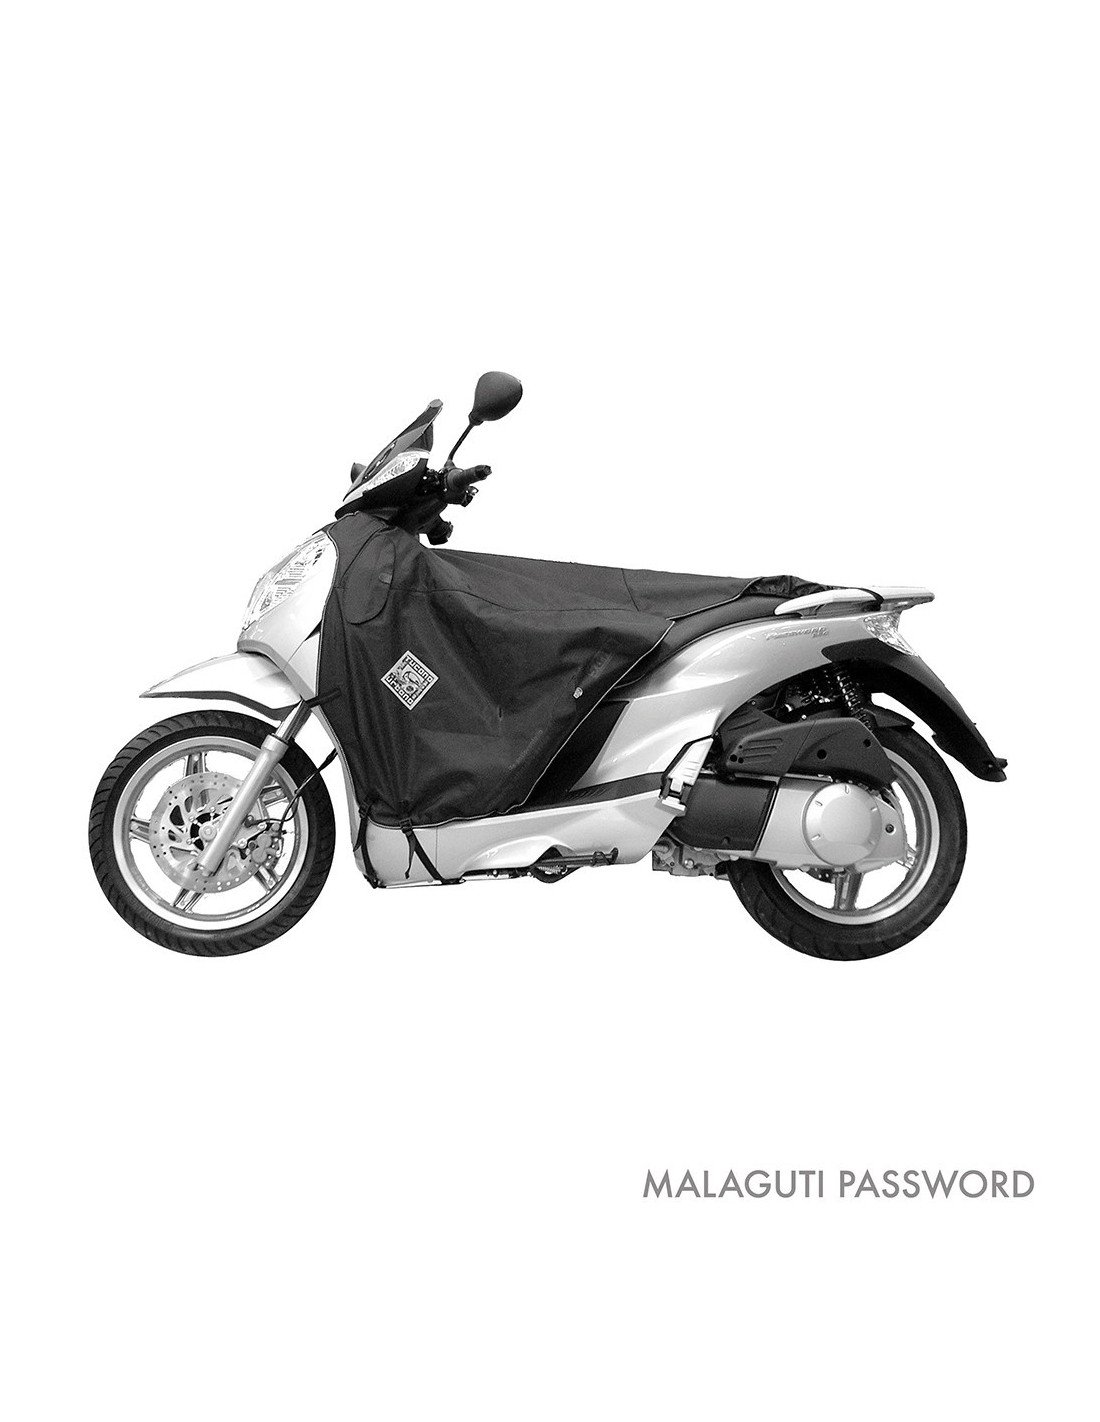 Tablier Scooter 50 Sampo LY50QT - 21LY50QT - 21 - Transcocasse